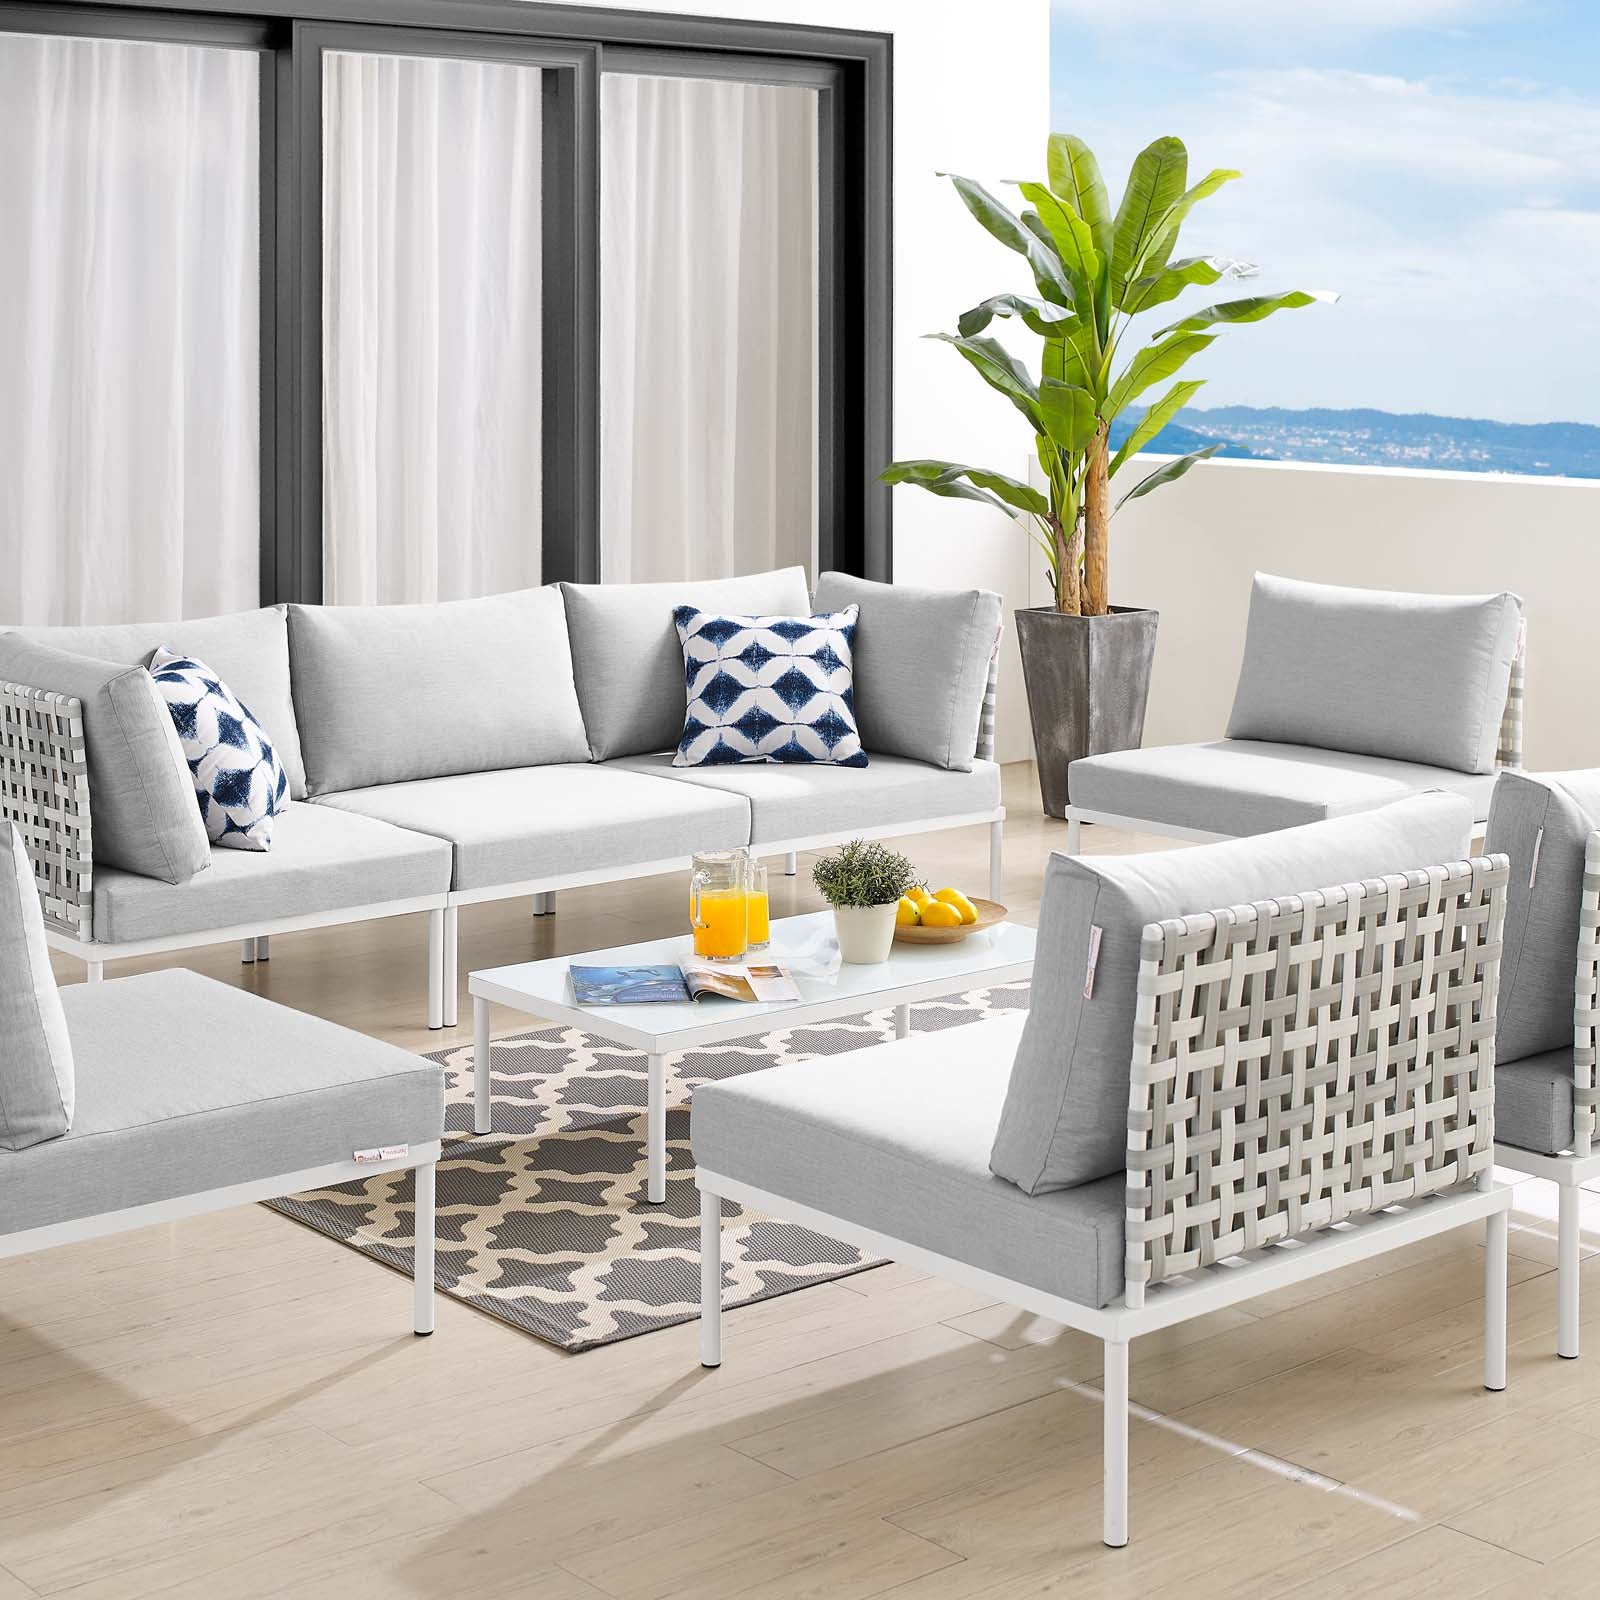 Modway Outdoor Conversation Sets - Harmony 8 Piece Sunbrella Basket Weave Outdoor Patio Sectional Sofa Set Taupe Gray